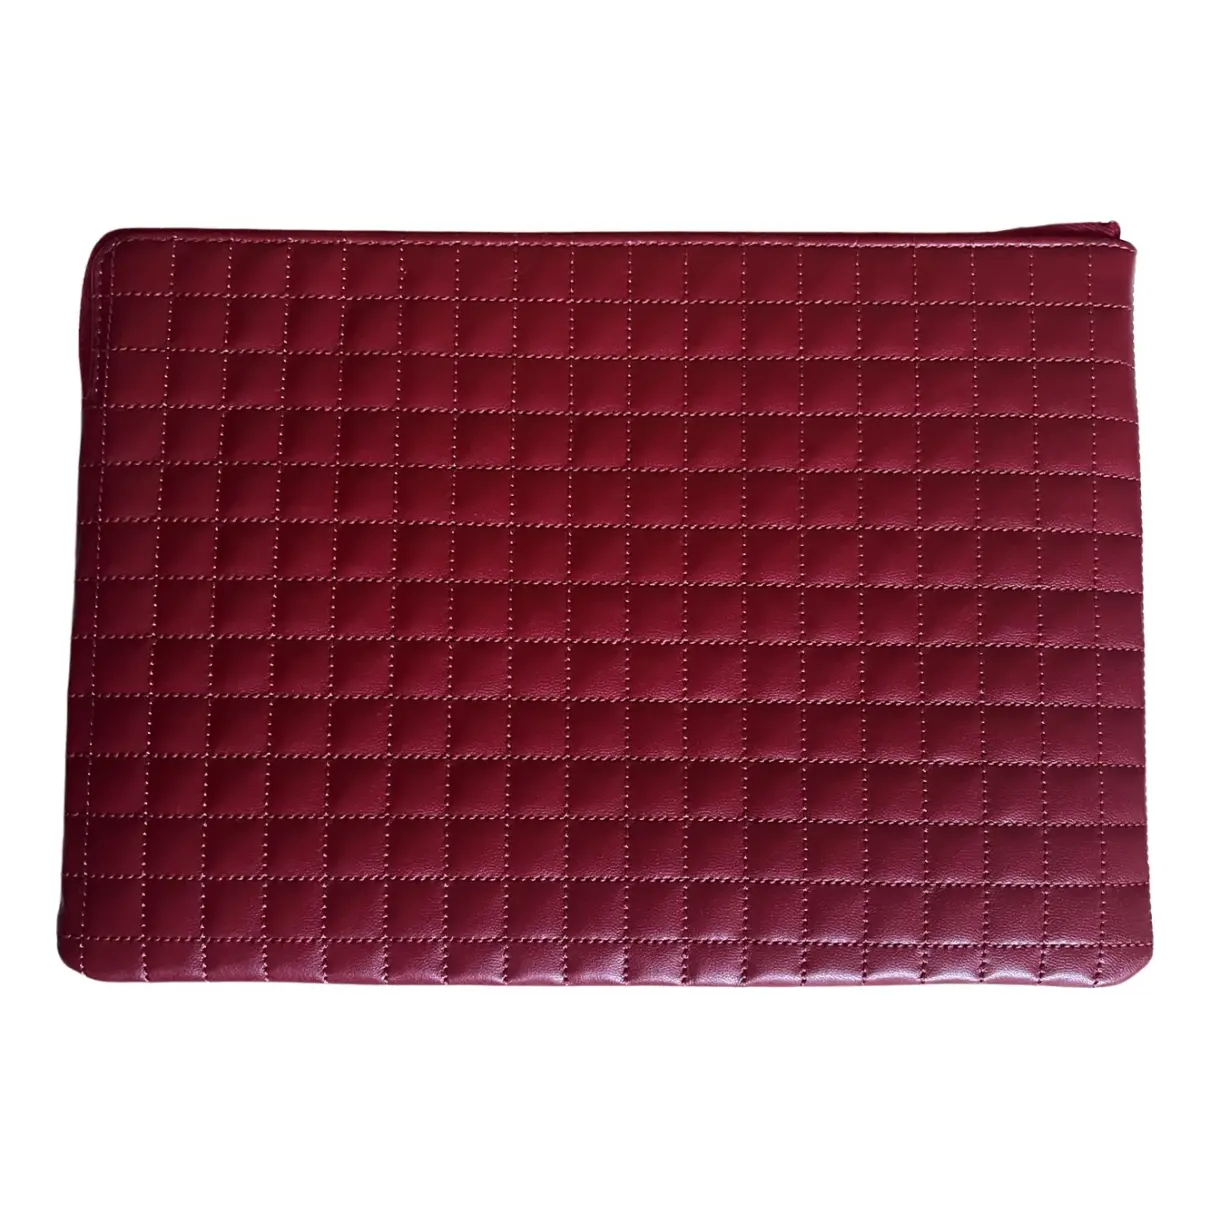 All Soft leather clutch bag